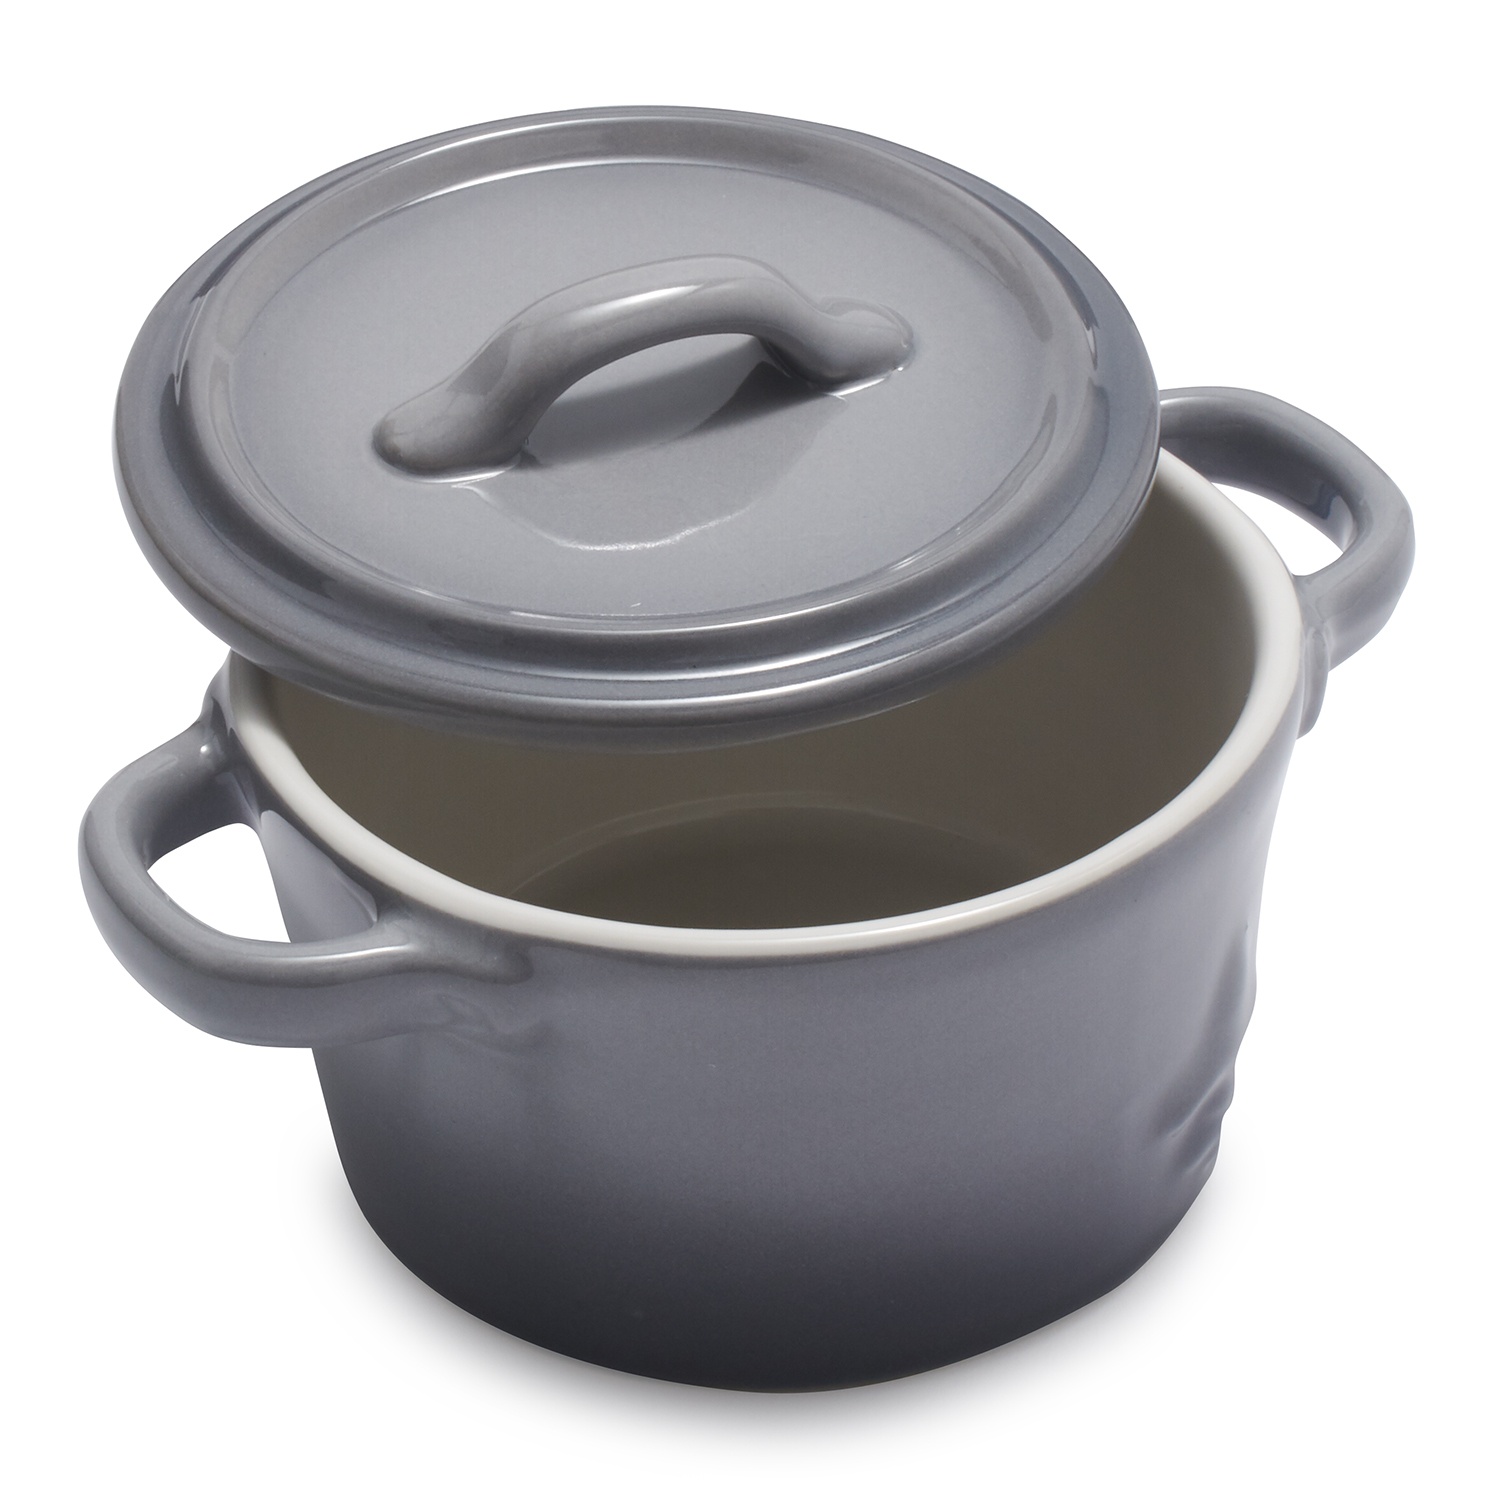 slide 1 of 1, La Marque 84 Oven to Table Round Cocotte, Gray, 8 oz